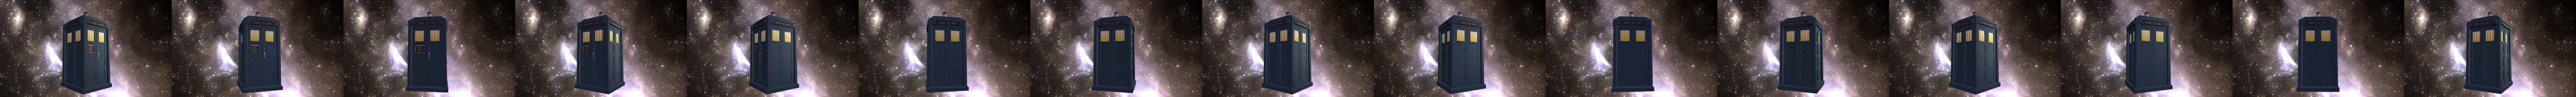 13th Doctor Tardis V2 Download Free 3d Model By